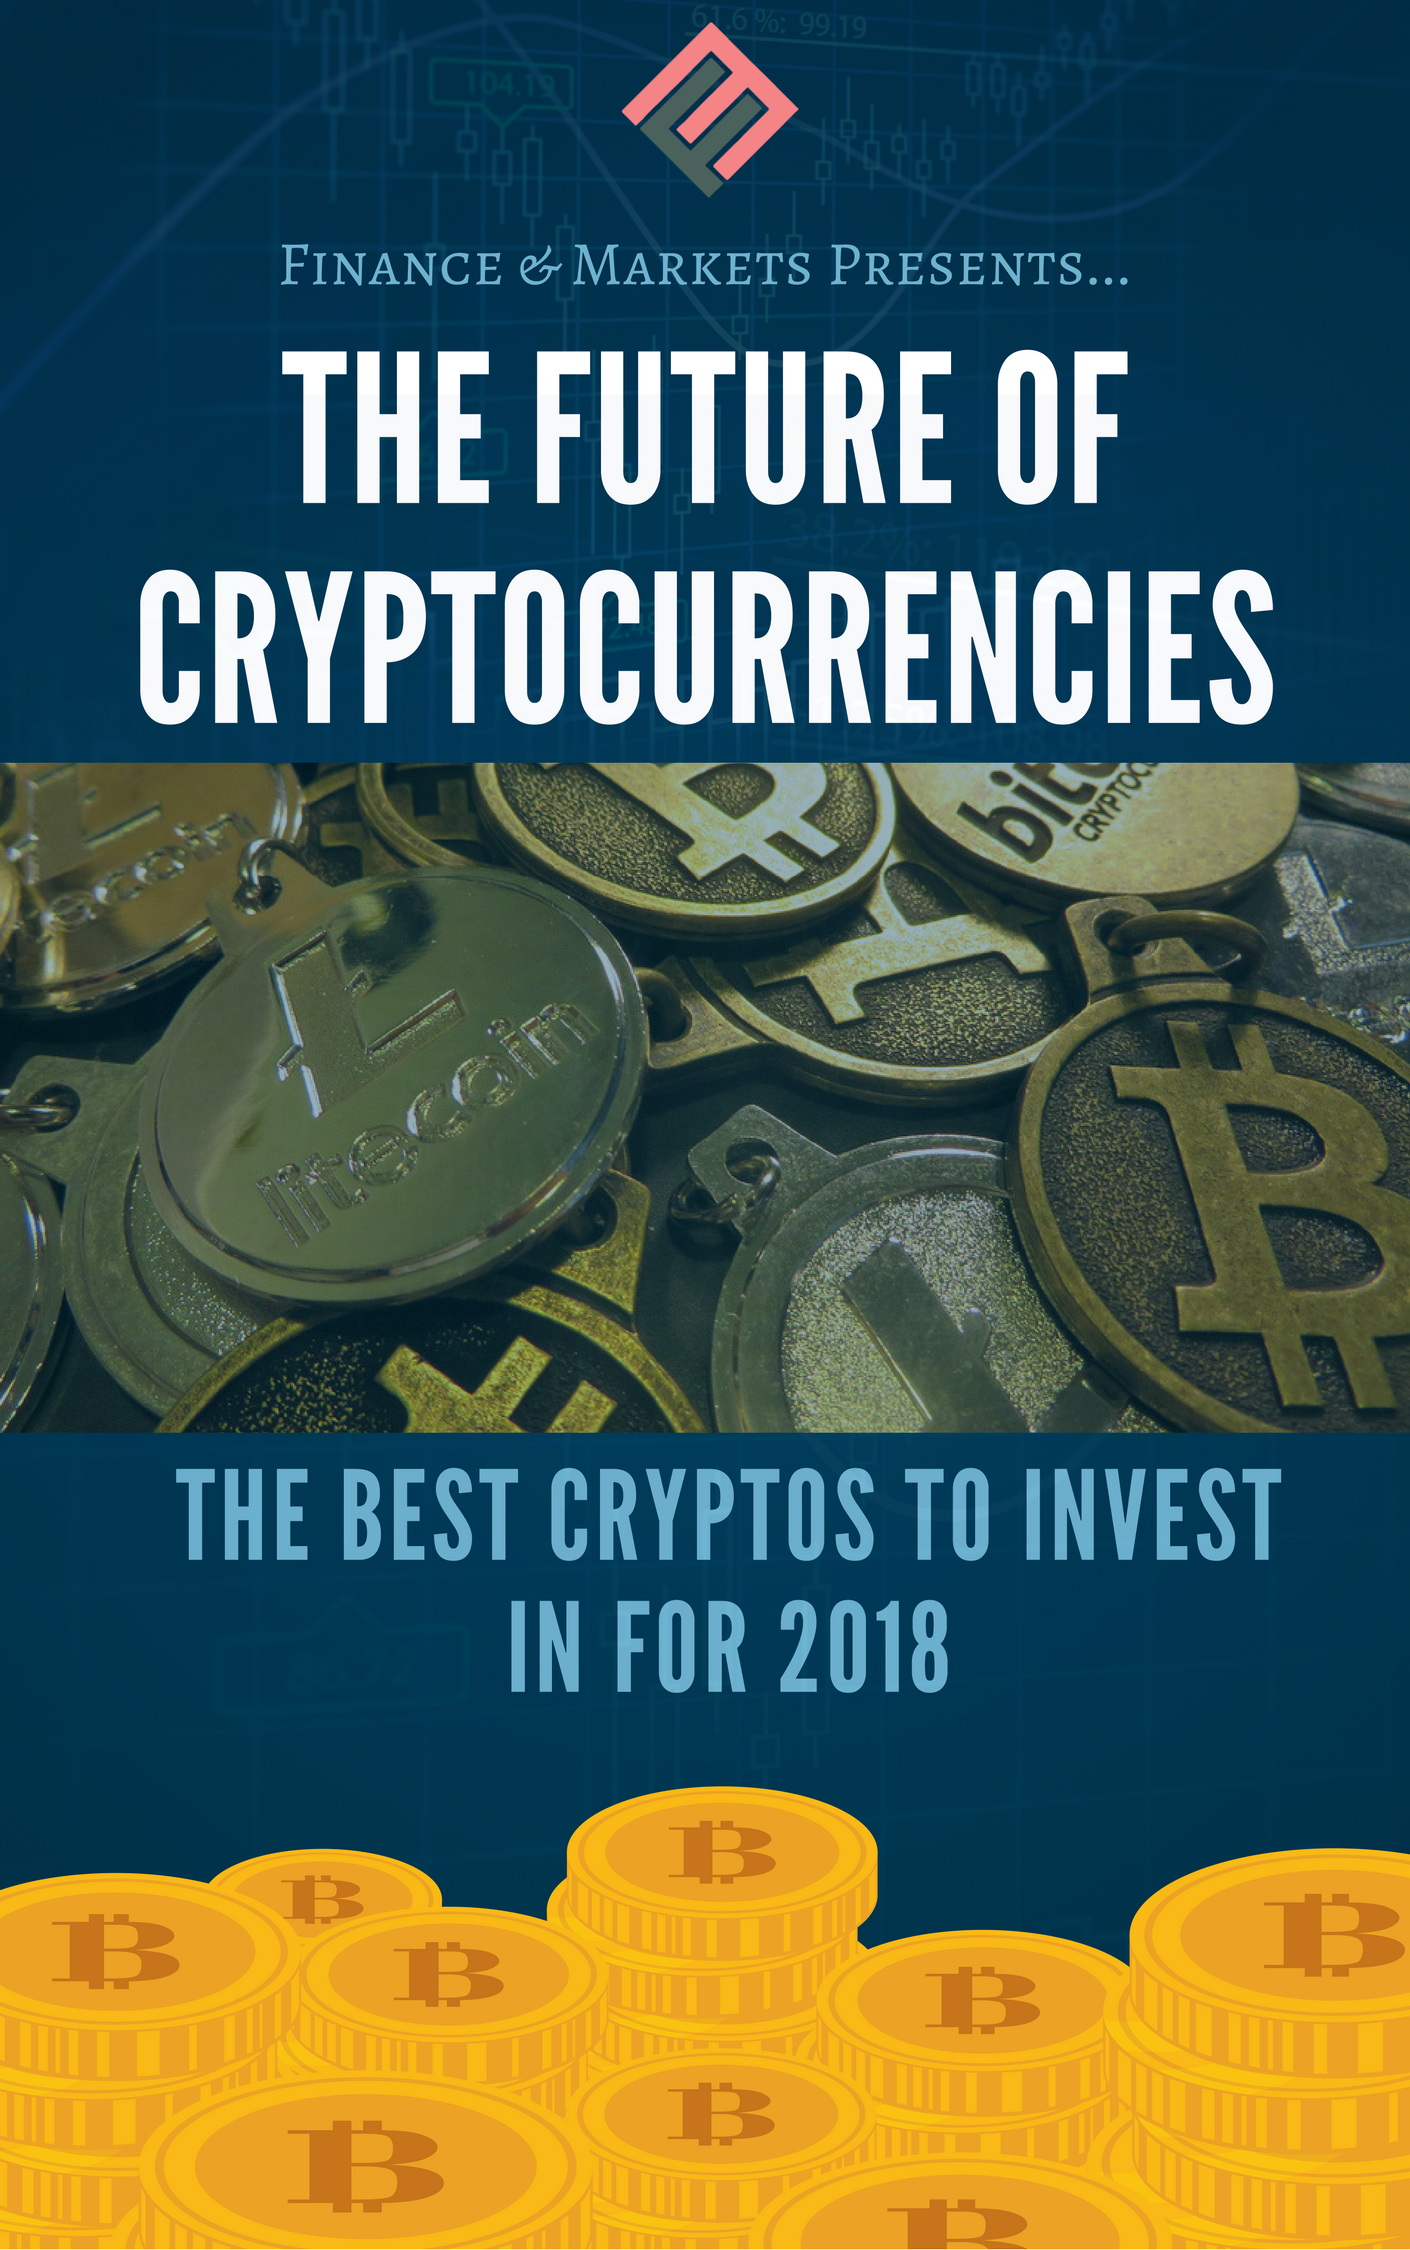 The Best Cryptocurrencies To Invest In 2018